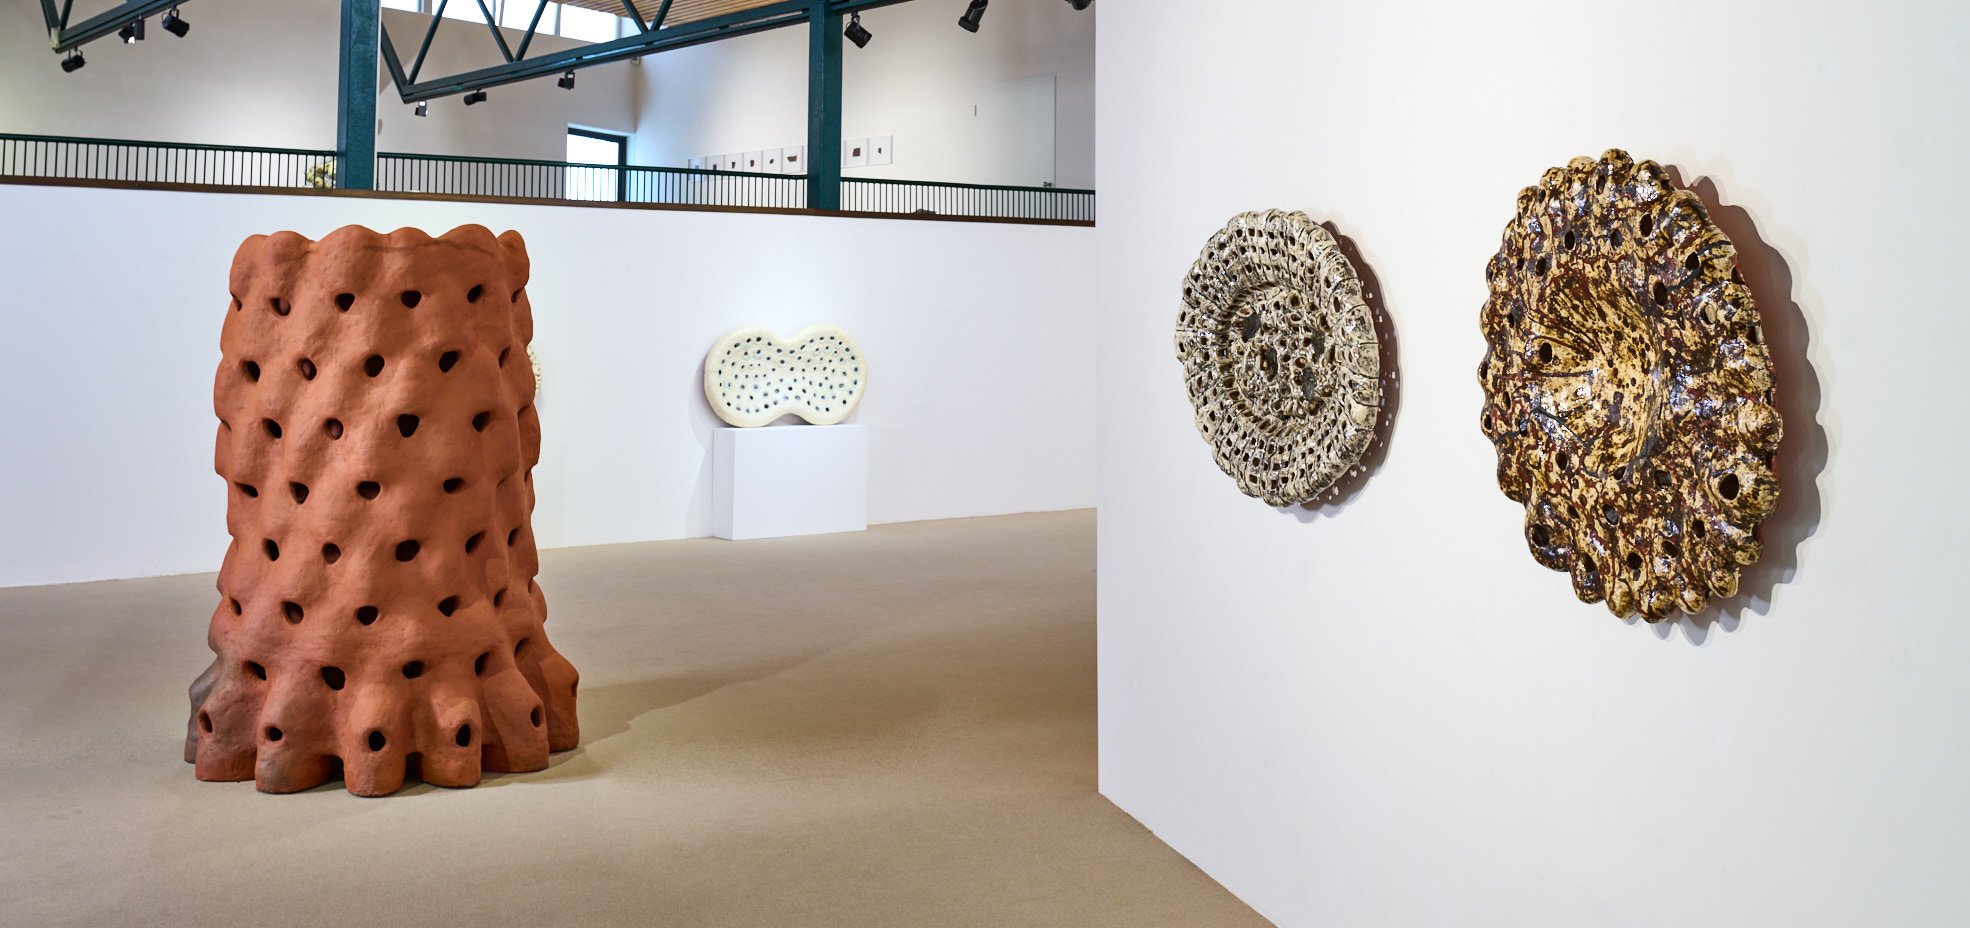 Installation View Solo Exhibition at National Ceramic Museum Westerwald, Germany 2021